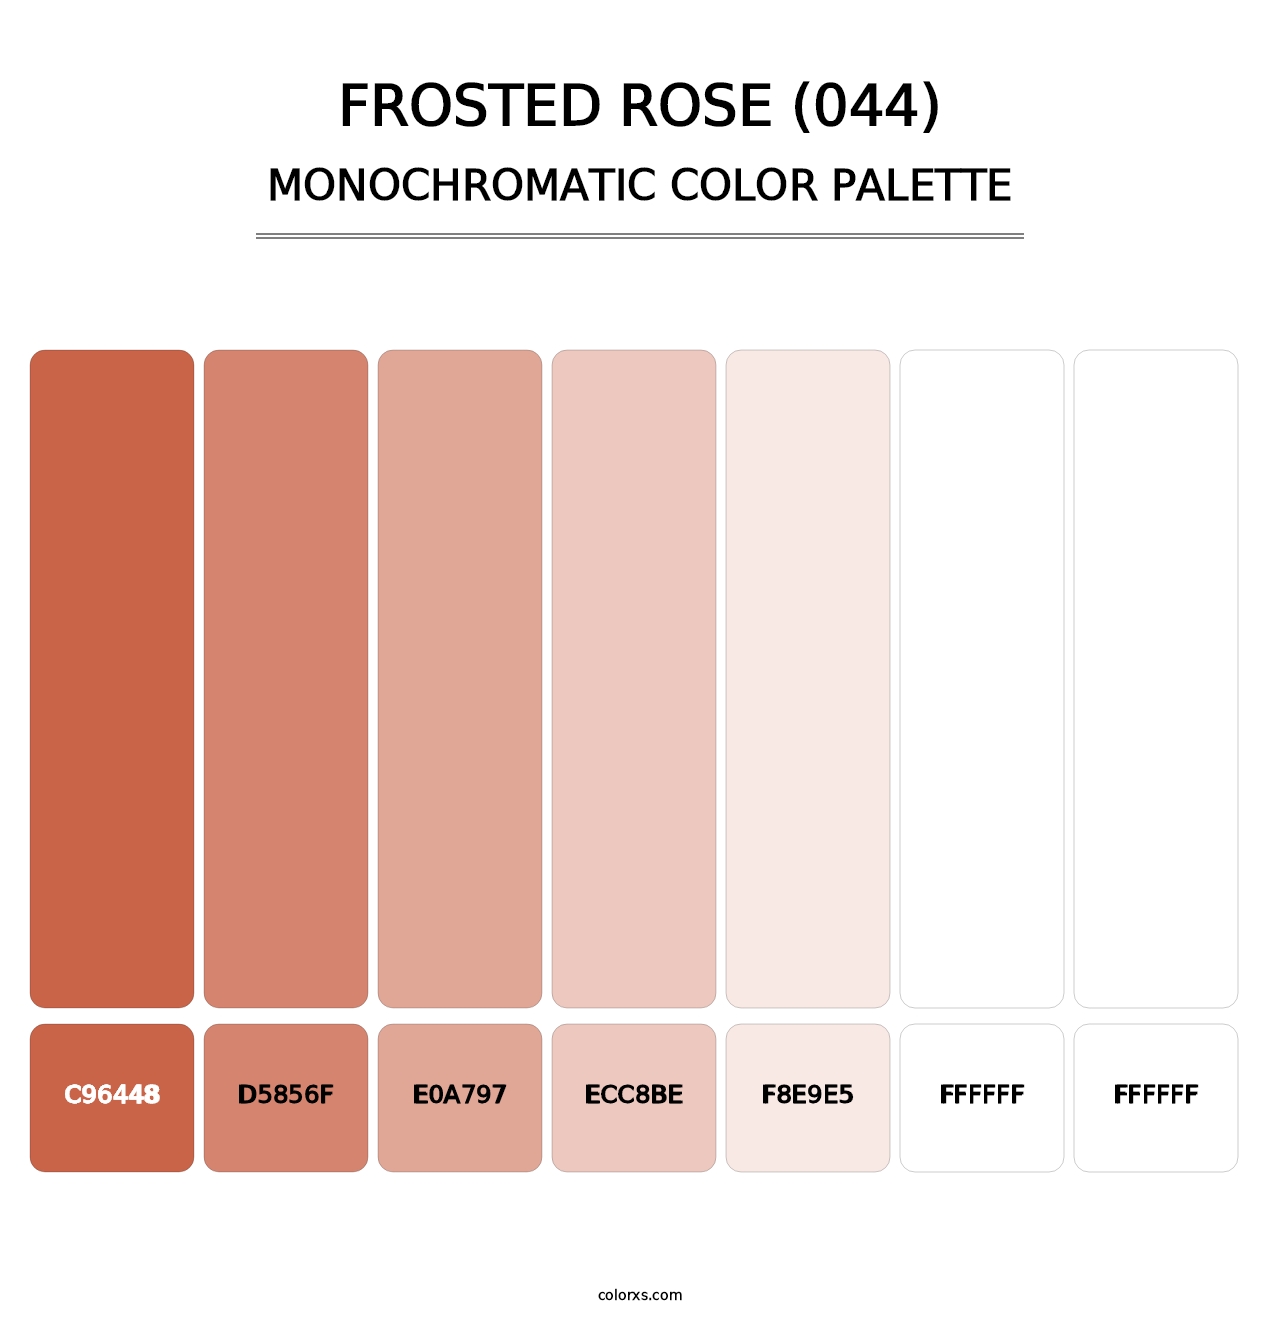 Frosted Rose (044) - Monochromatic Color Palette